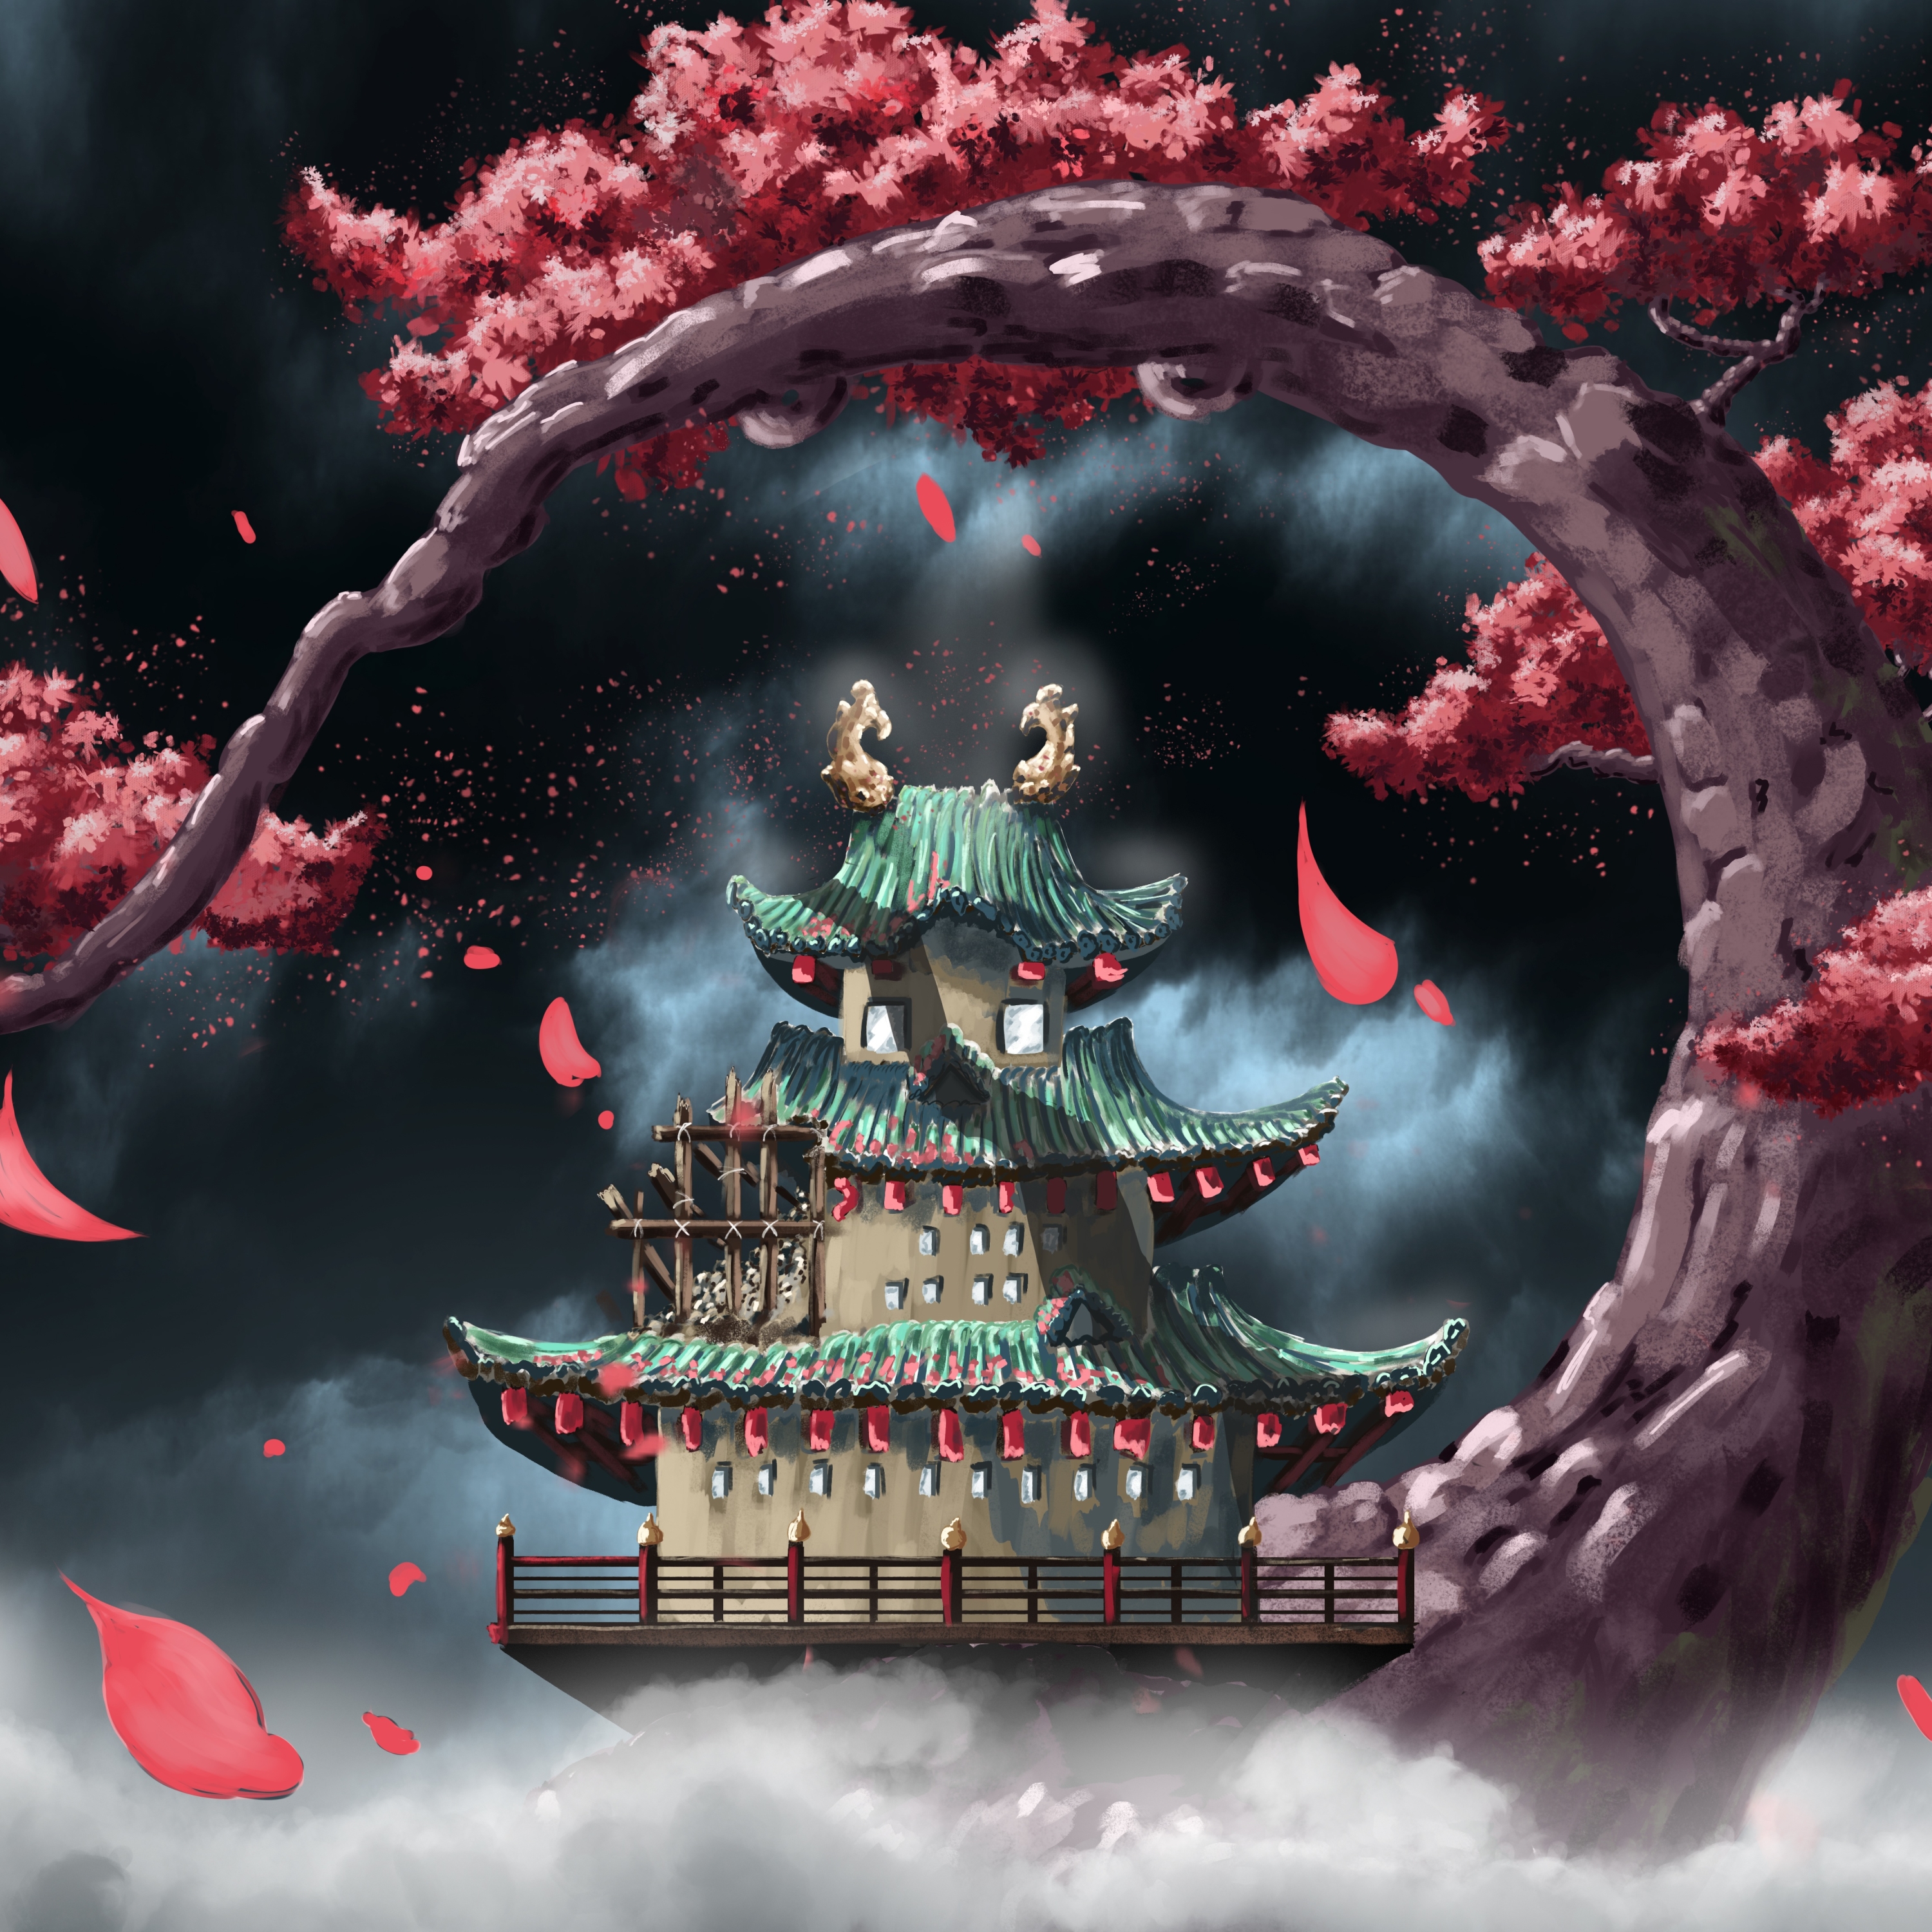 Wano Temple by apolo